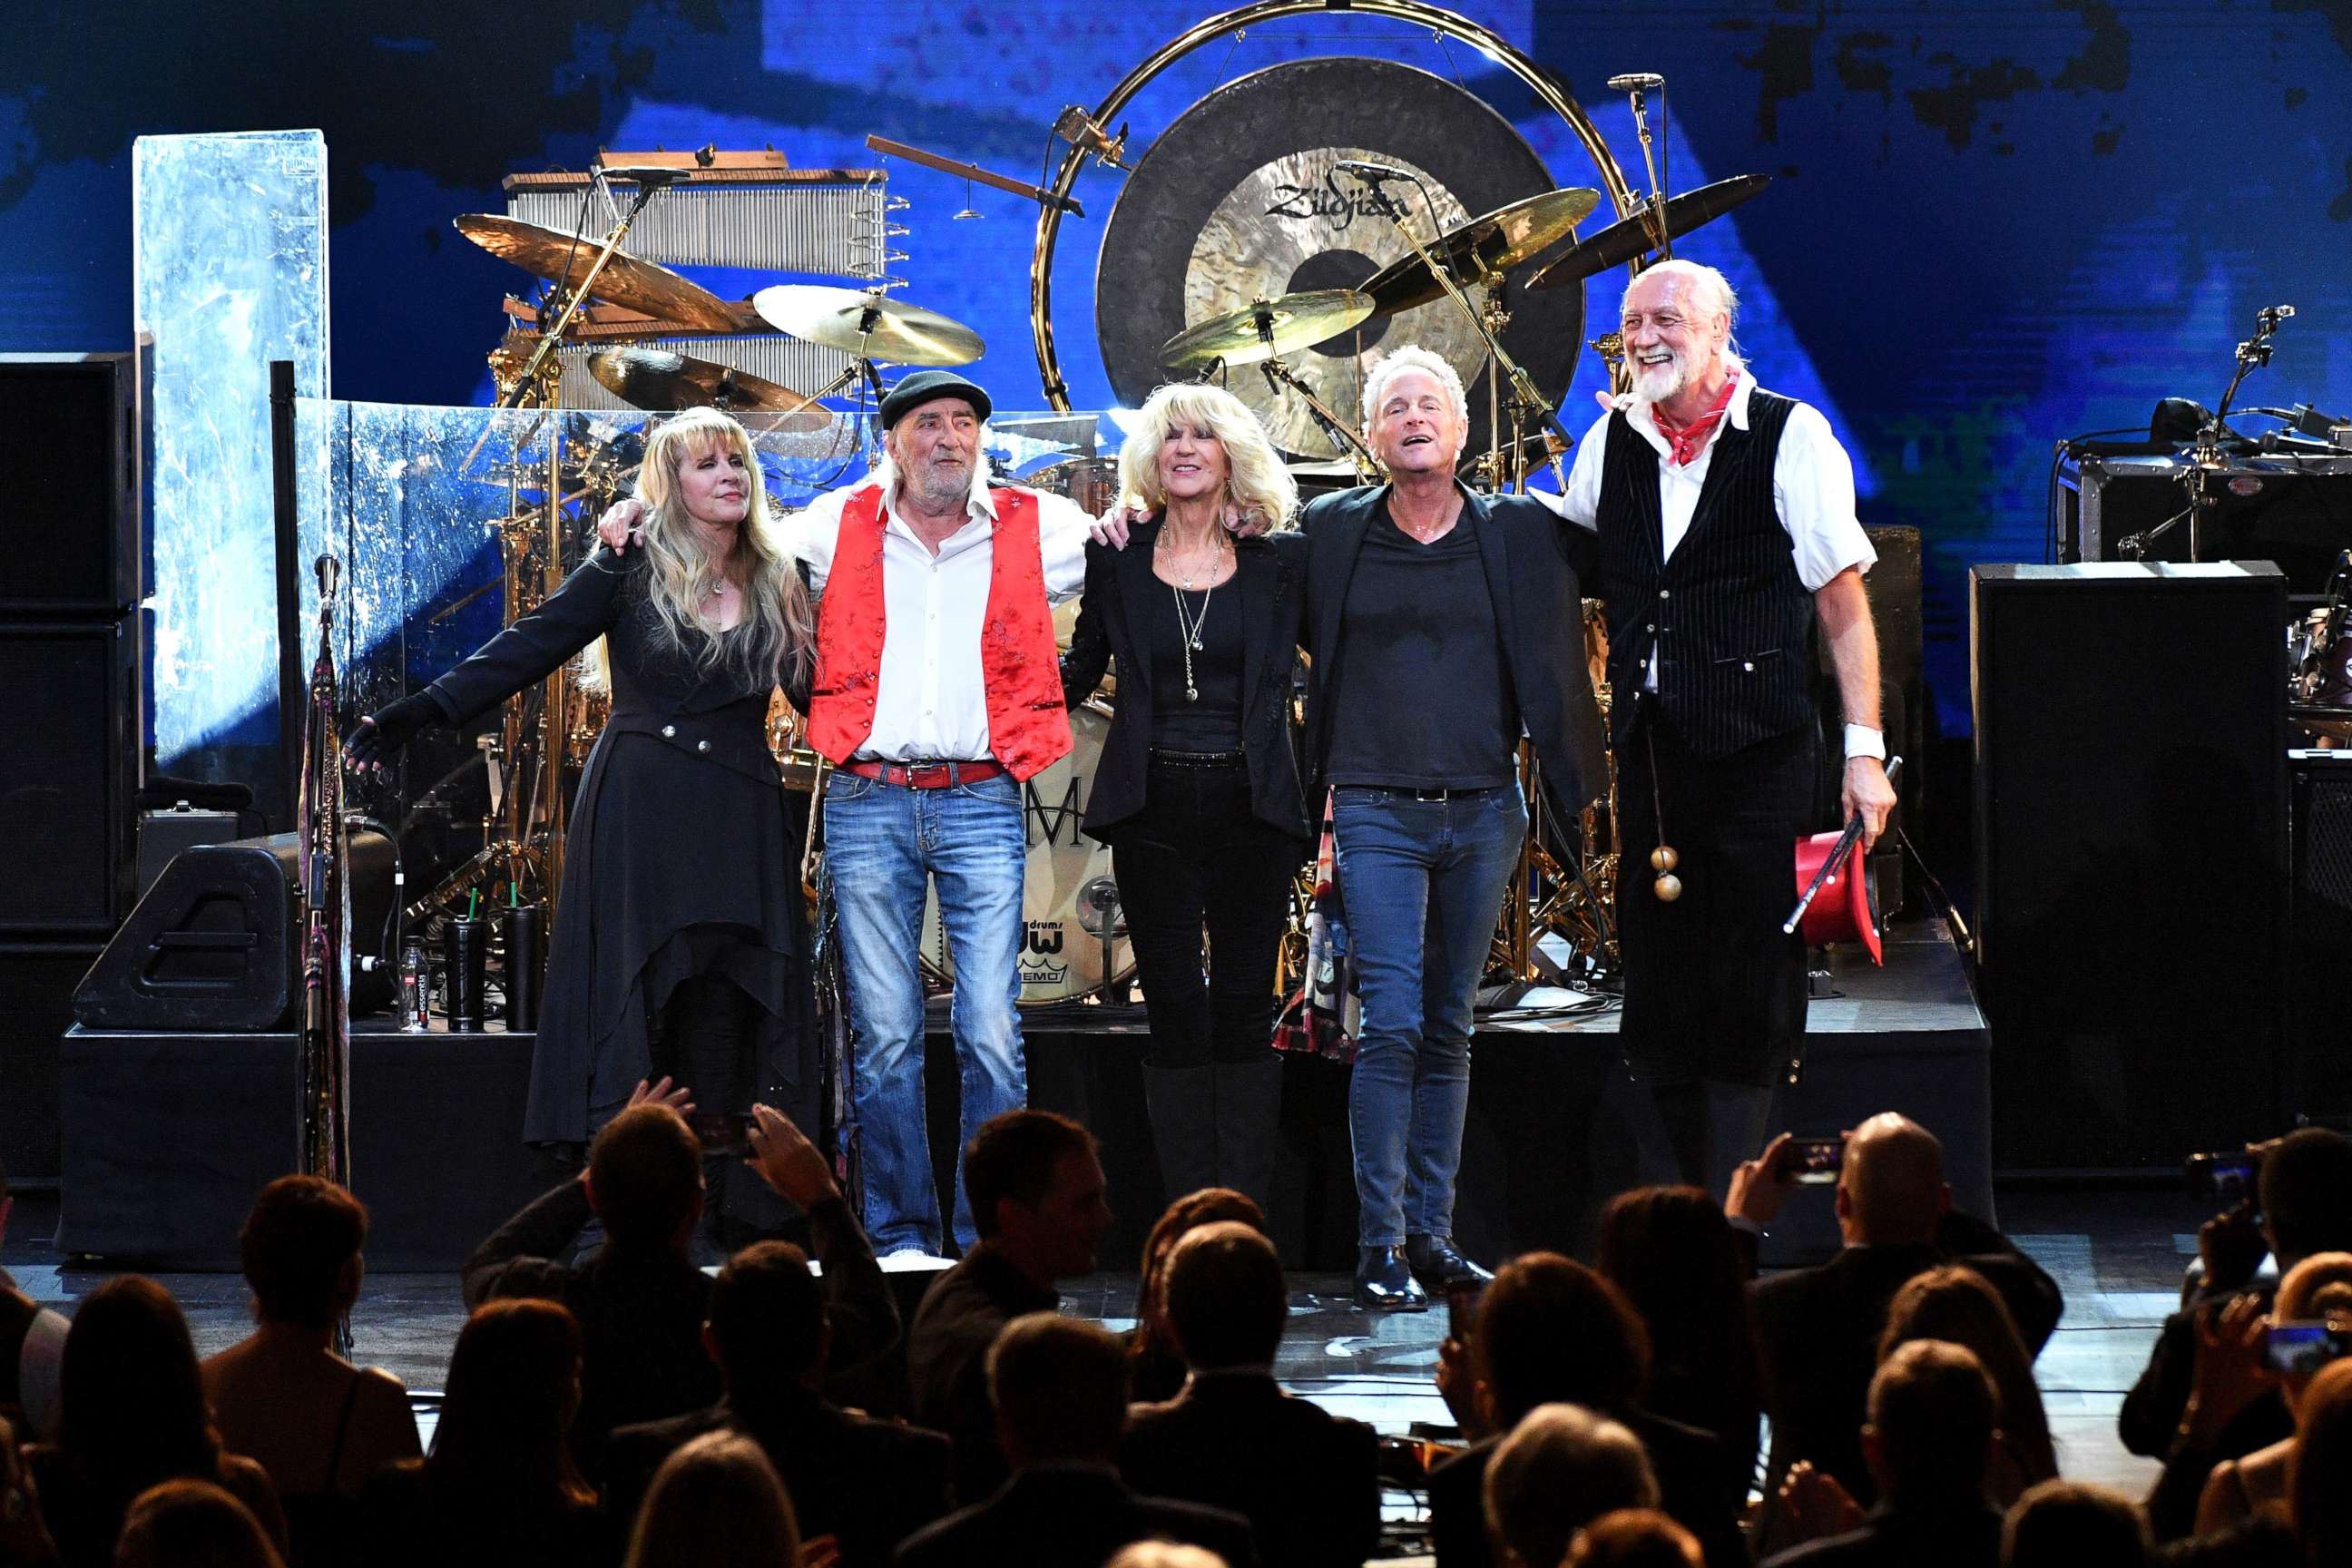 PHOTO: Stevie Nicks, John McVie, Christine McVie, Lindsey Buckingham and Mick Fleetwood are seen onstage during an event to honor Fleetwood Mac at Radio City Music Hall on Jan. 26, 2018 in New York.